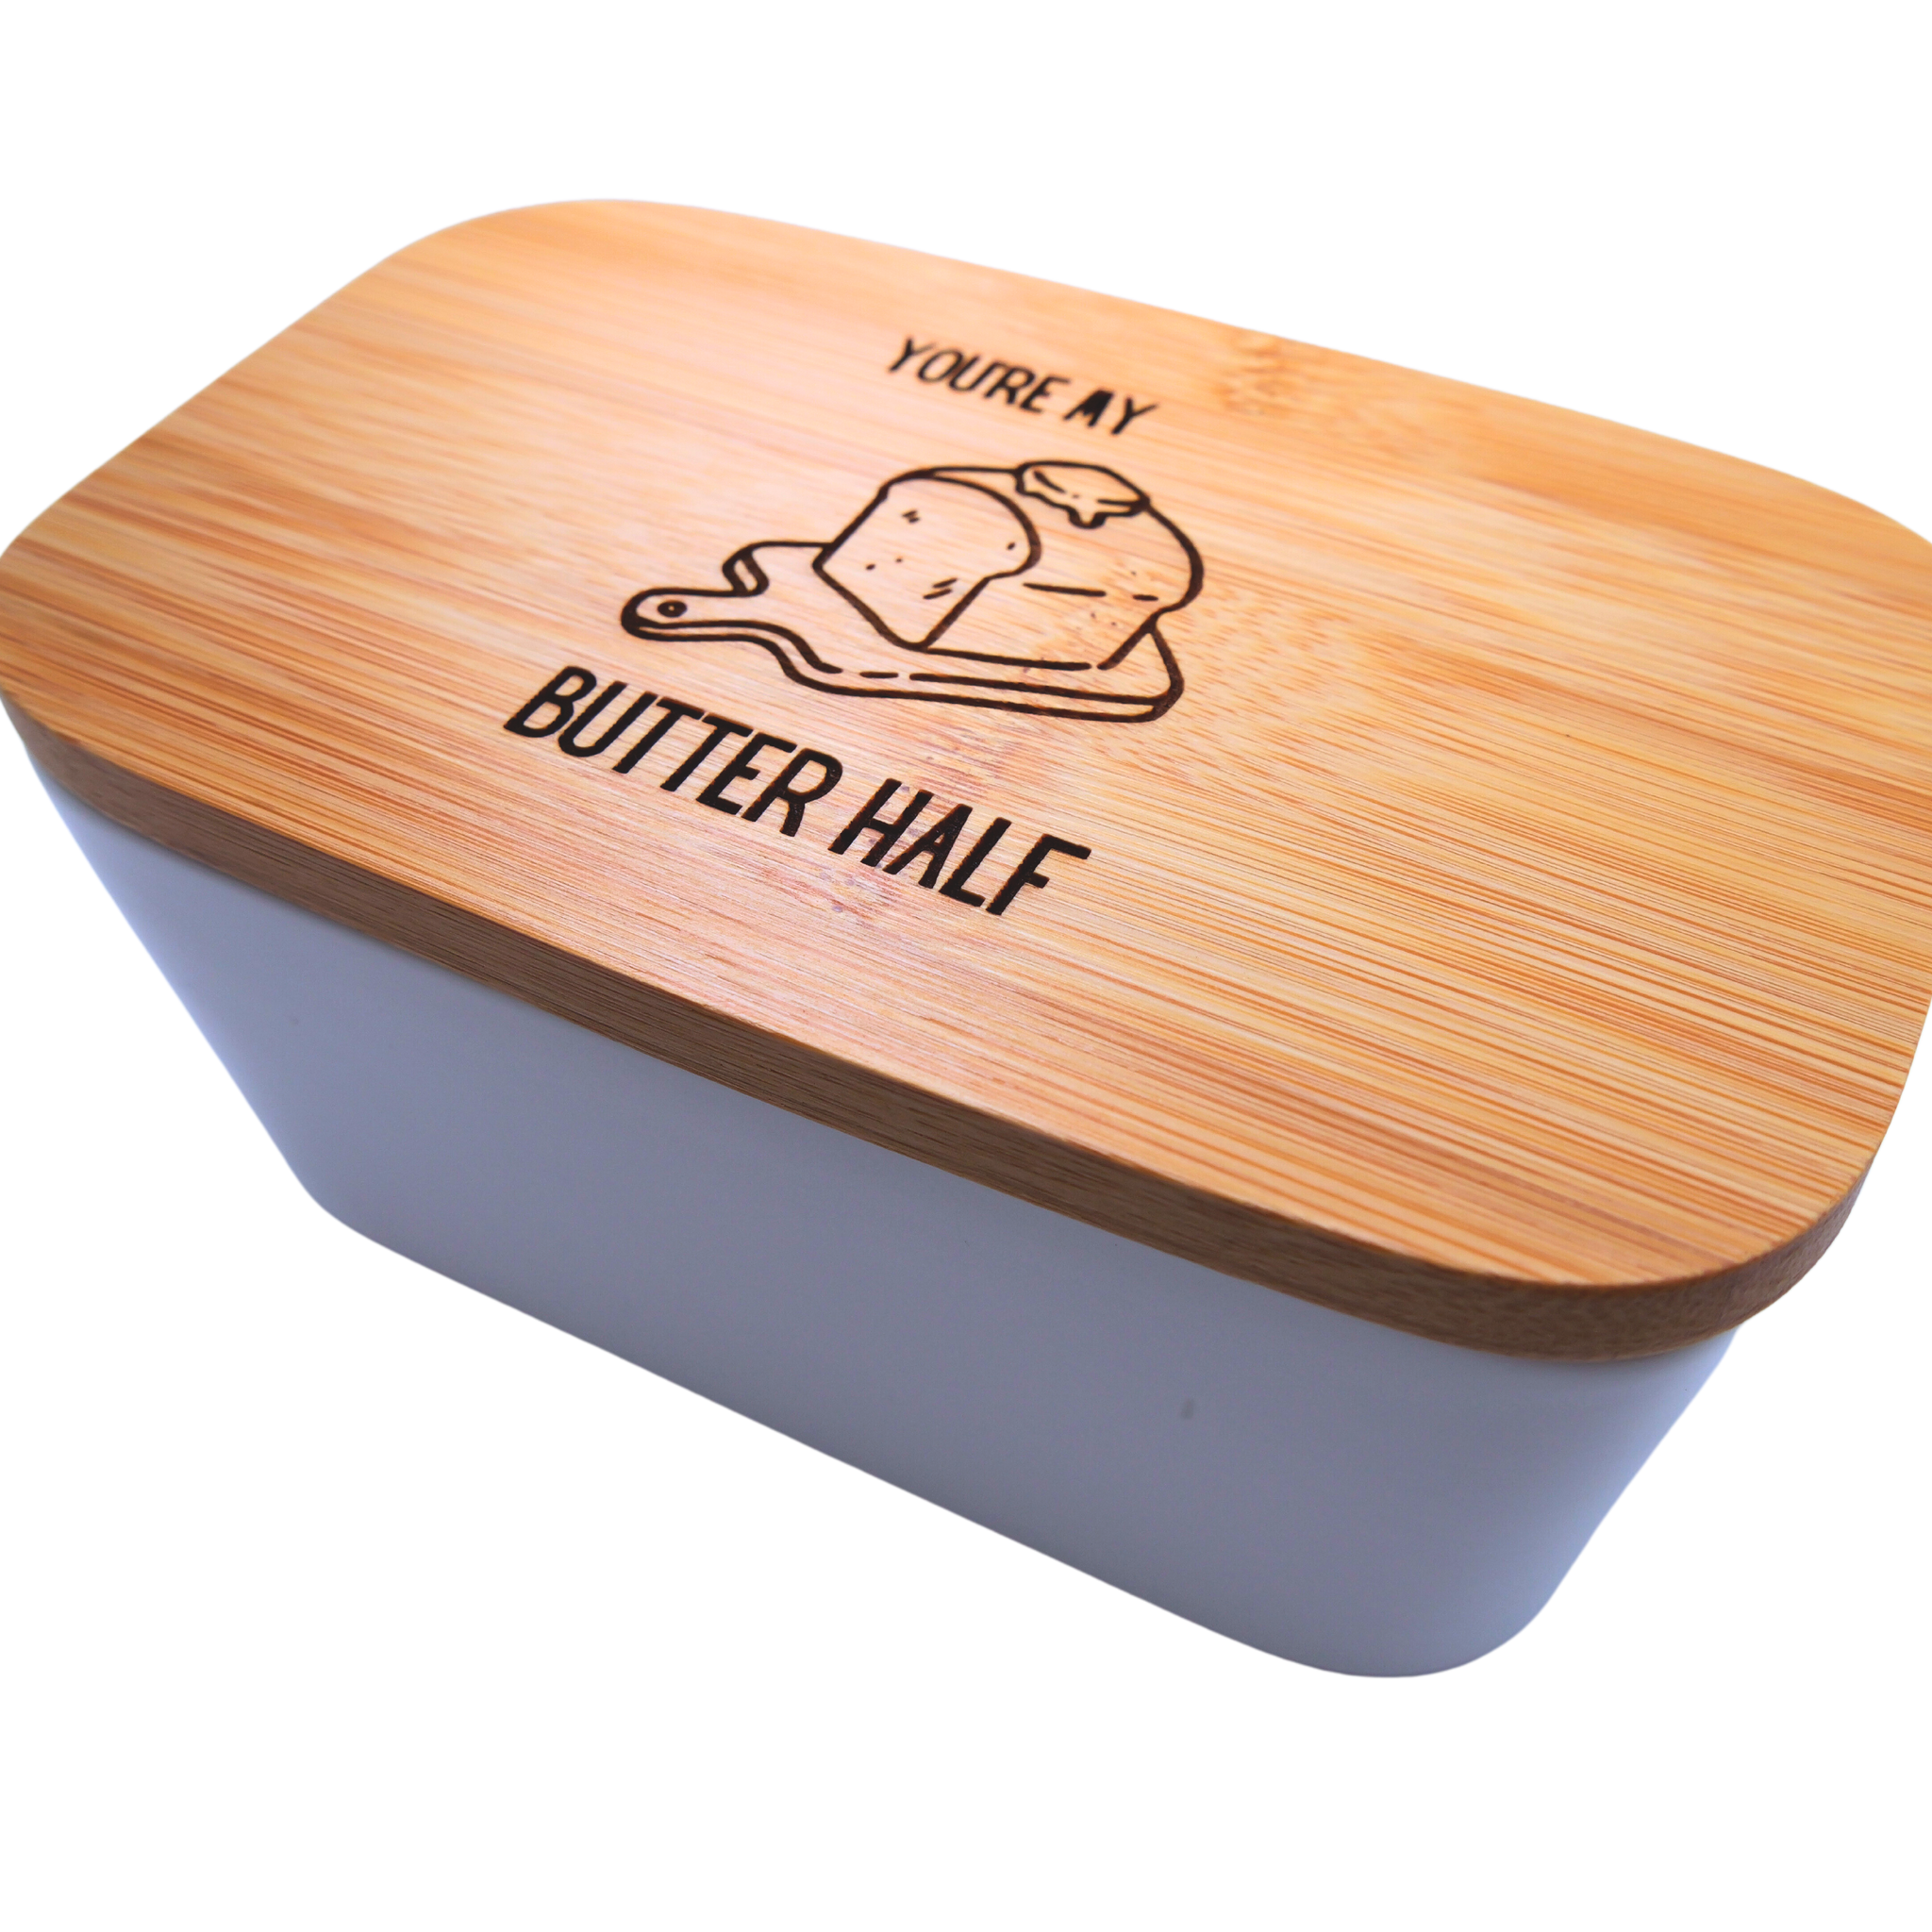 You're My Butter Half Ceramic White Butter Dish